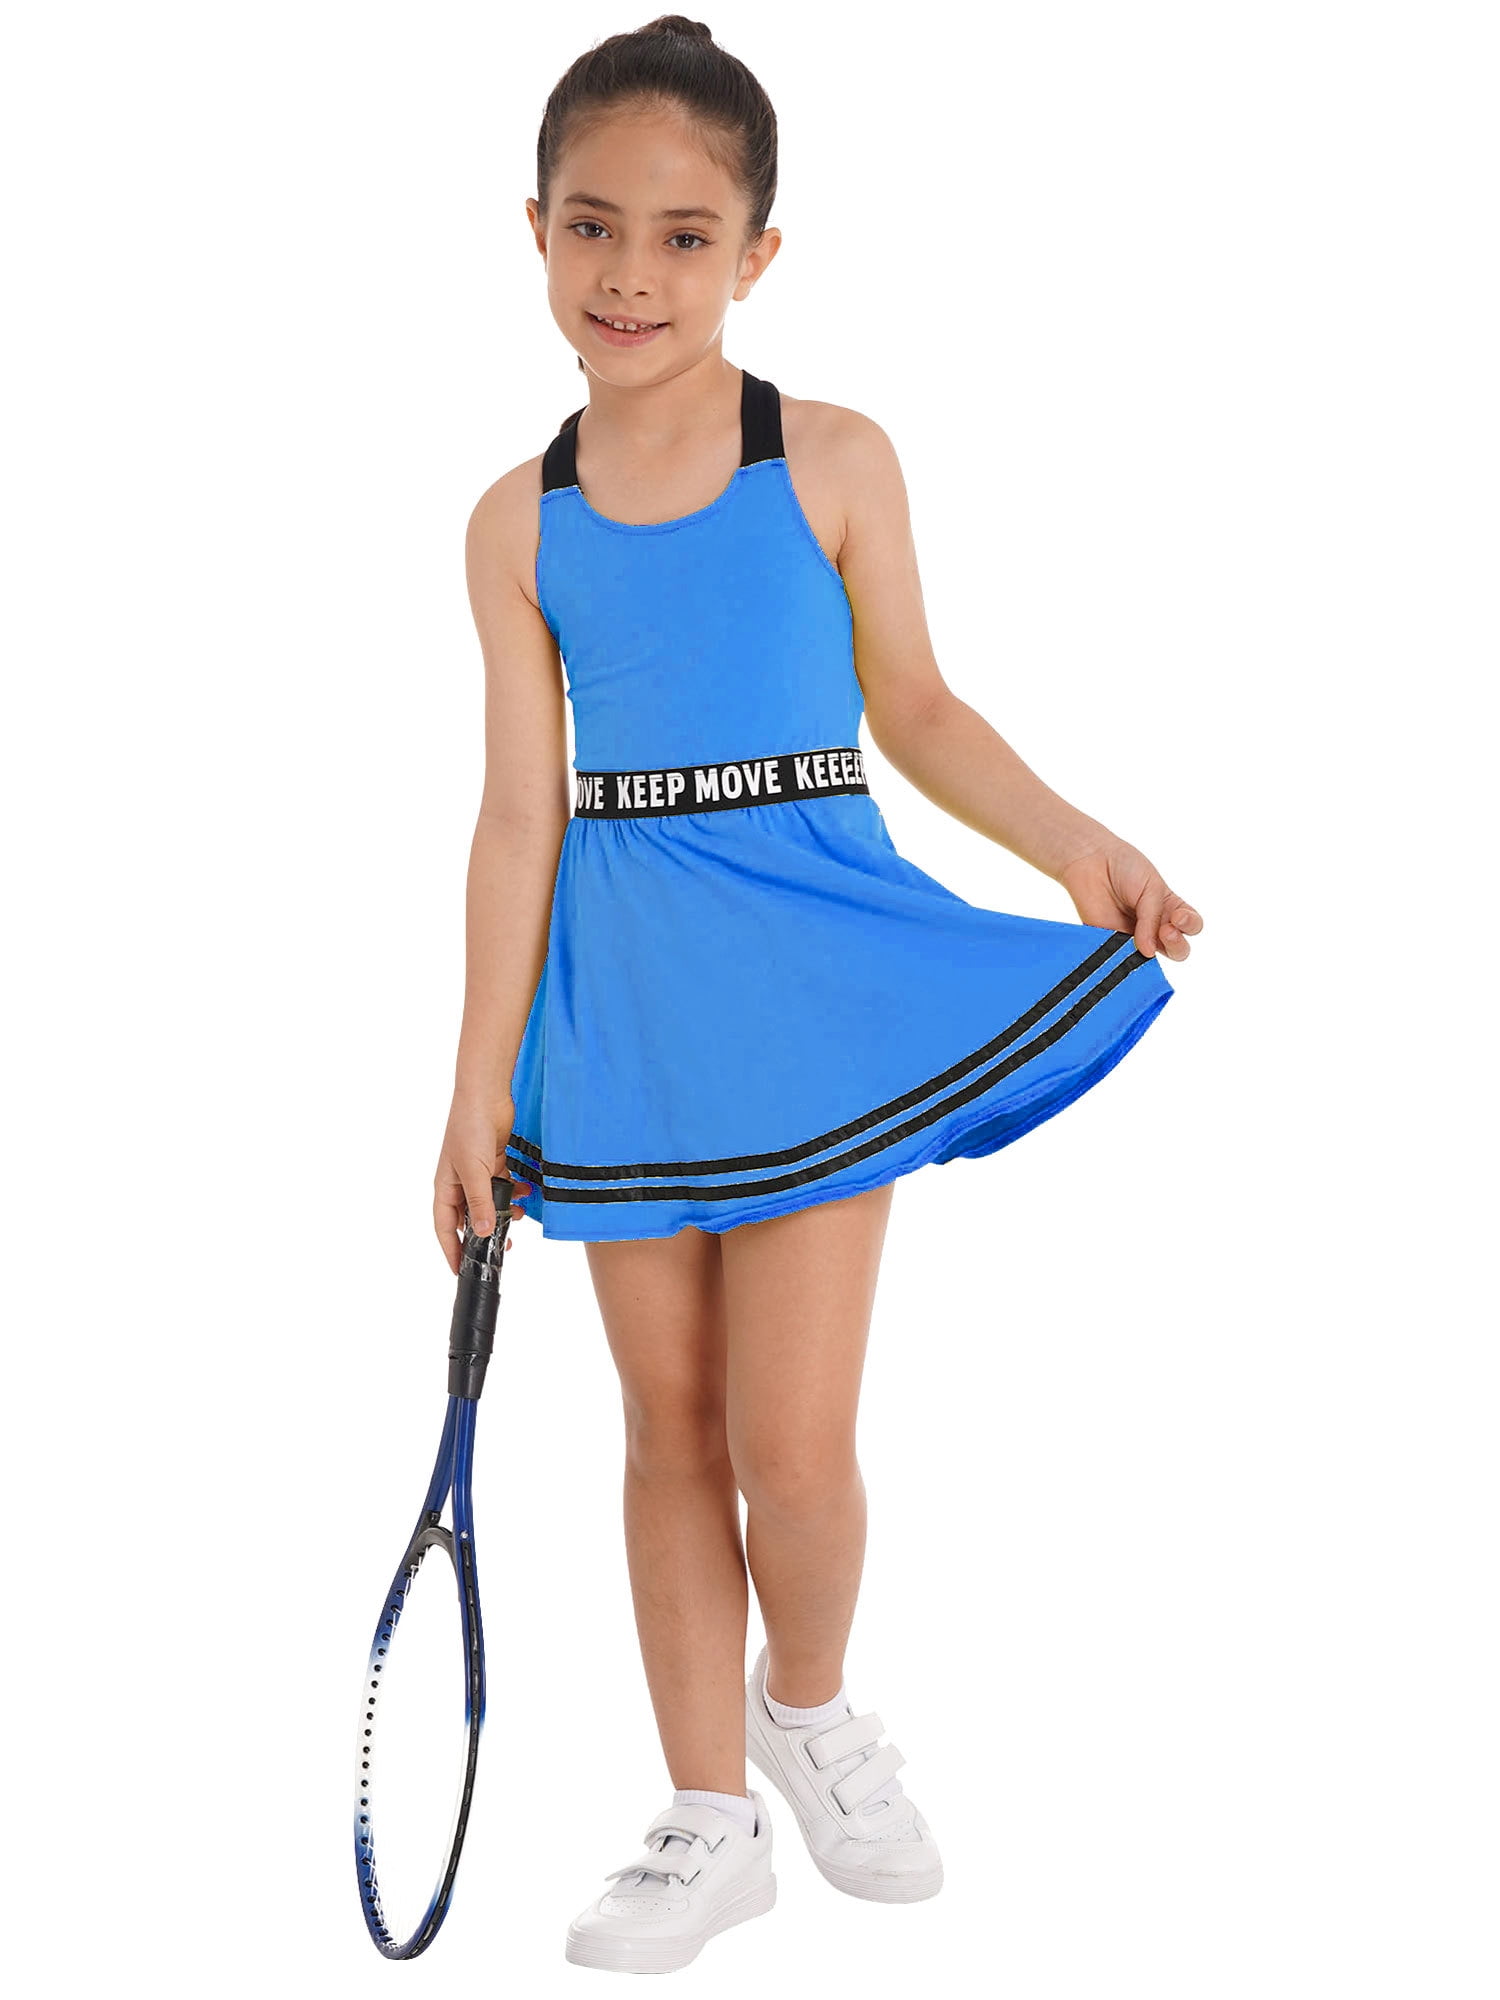 CHICTRY Girls 2Pcs Sports Suit Gym Tennis A-line Dress with Shorts Set  Activewear,Sizes 6-14 